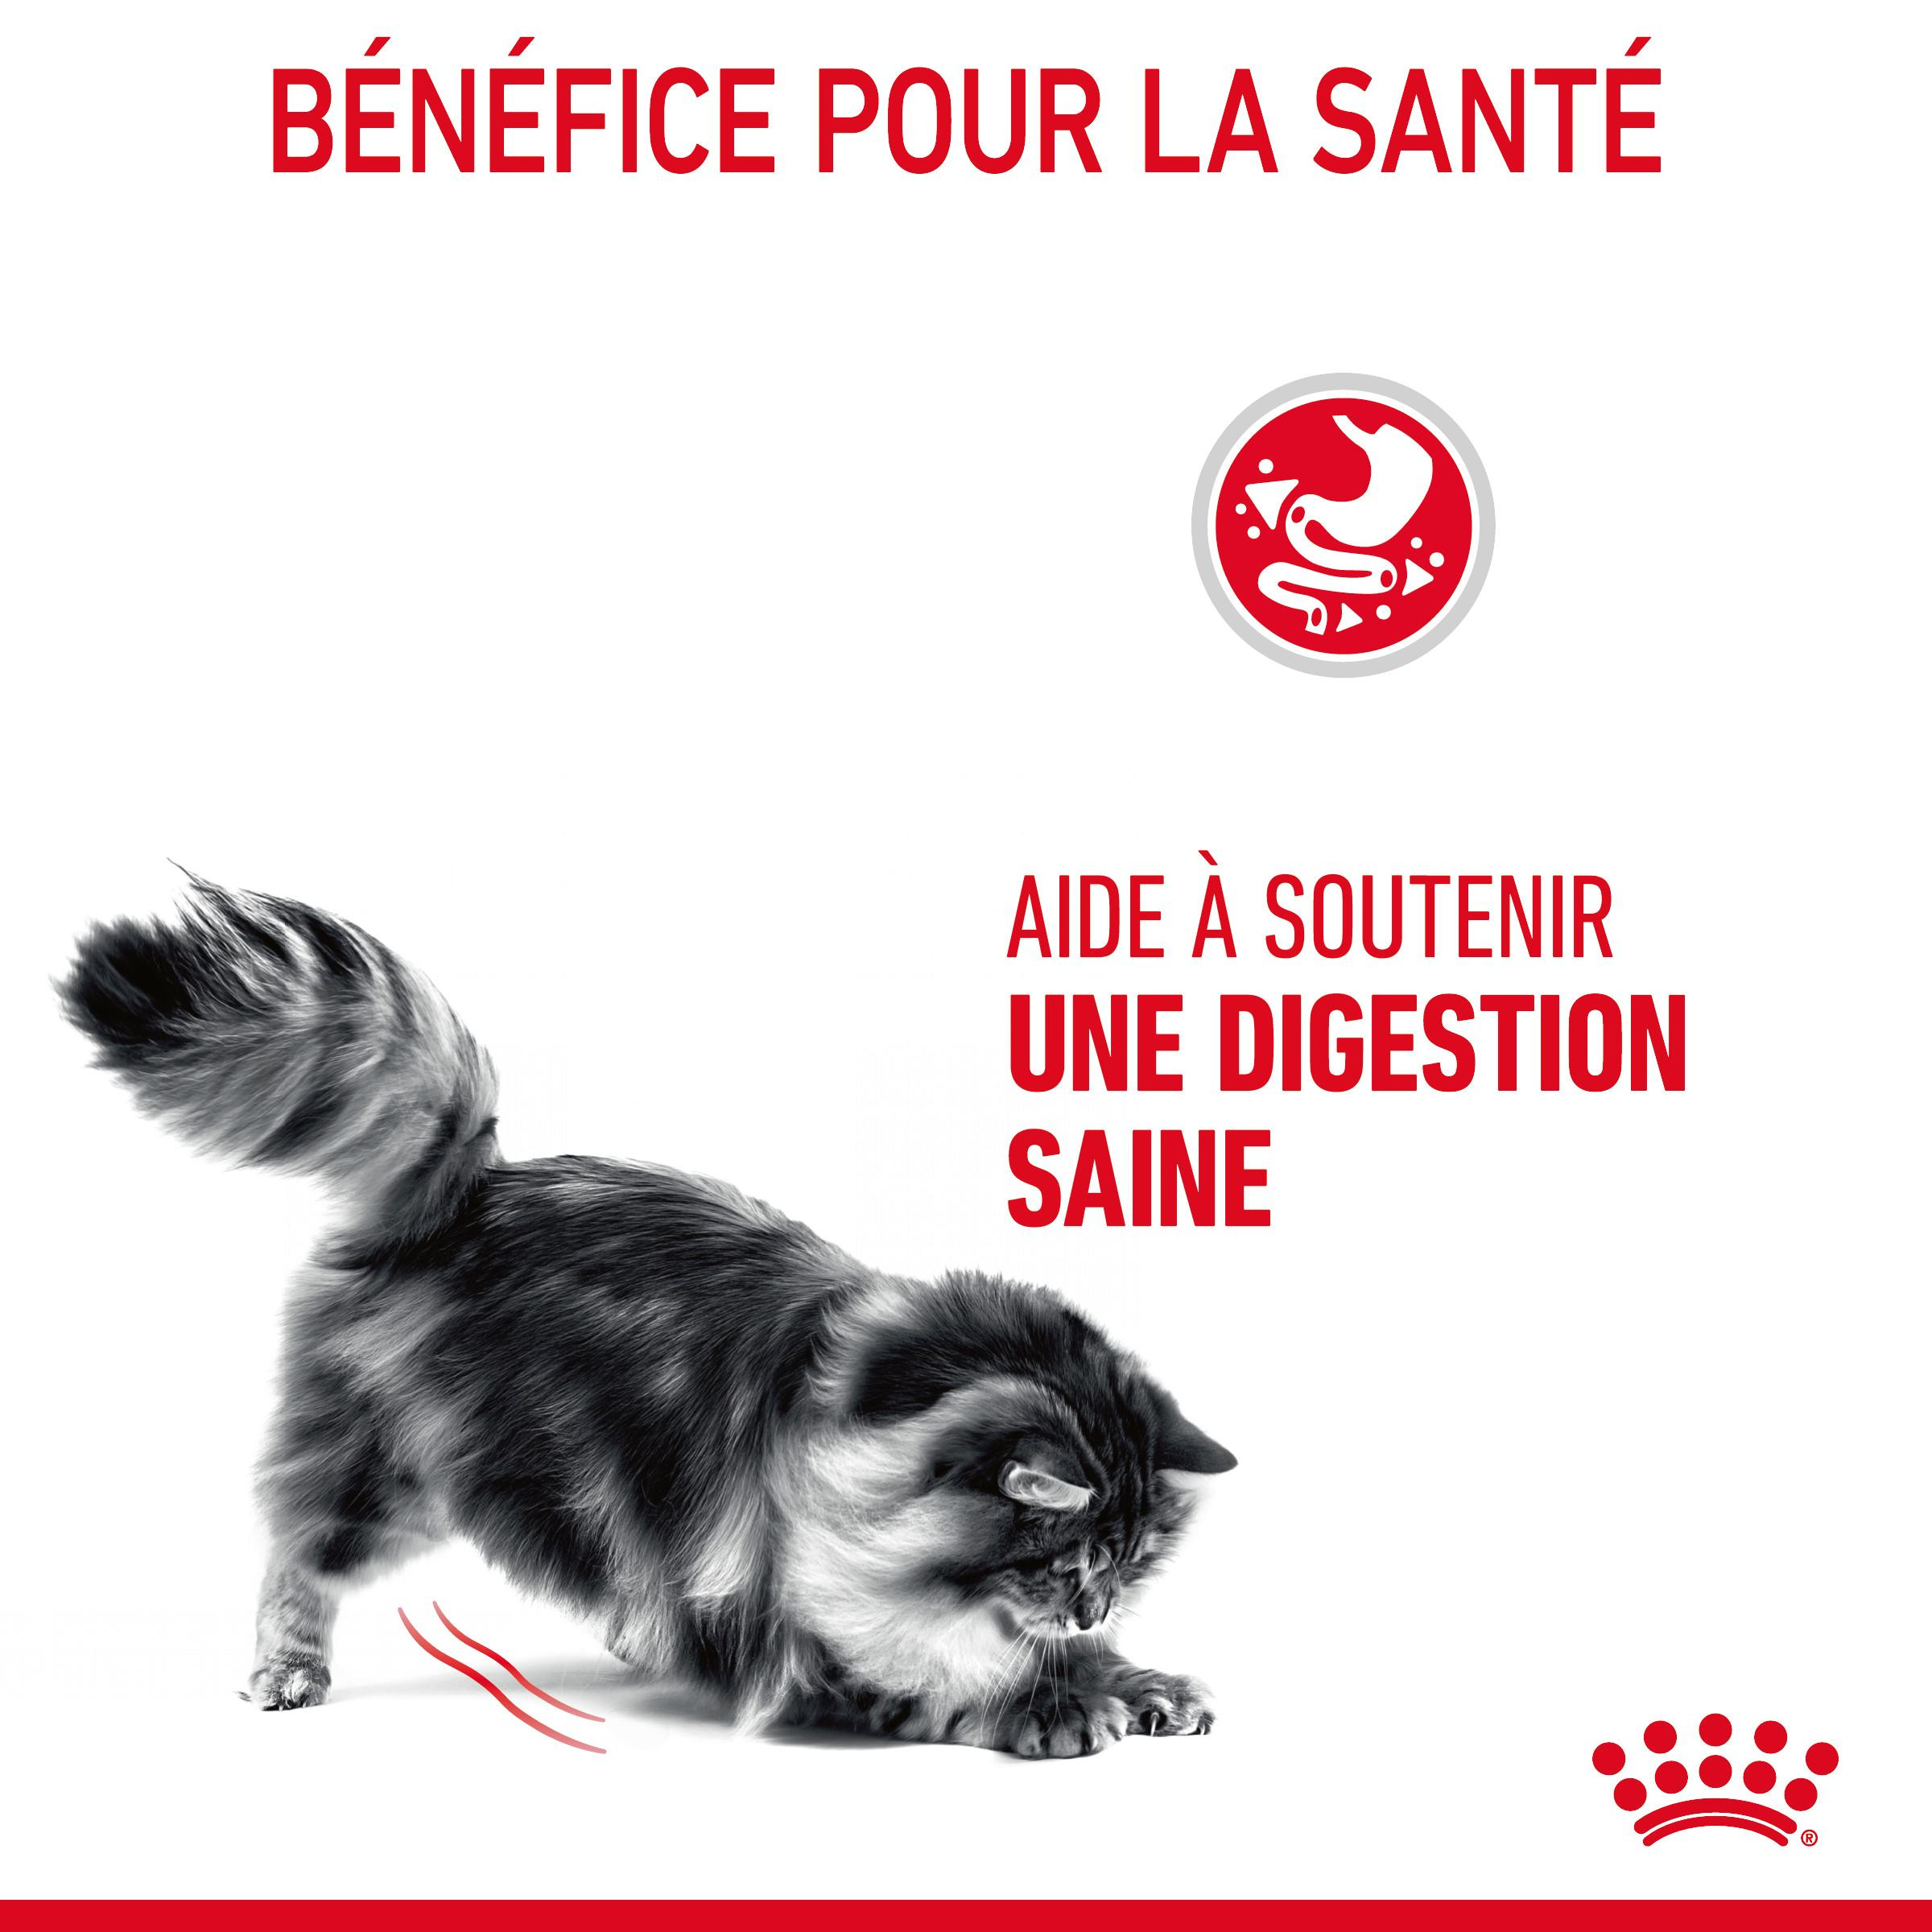 Royal Canin Digestive Care pour chat